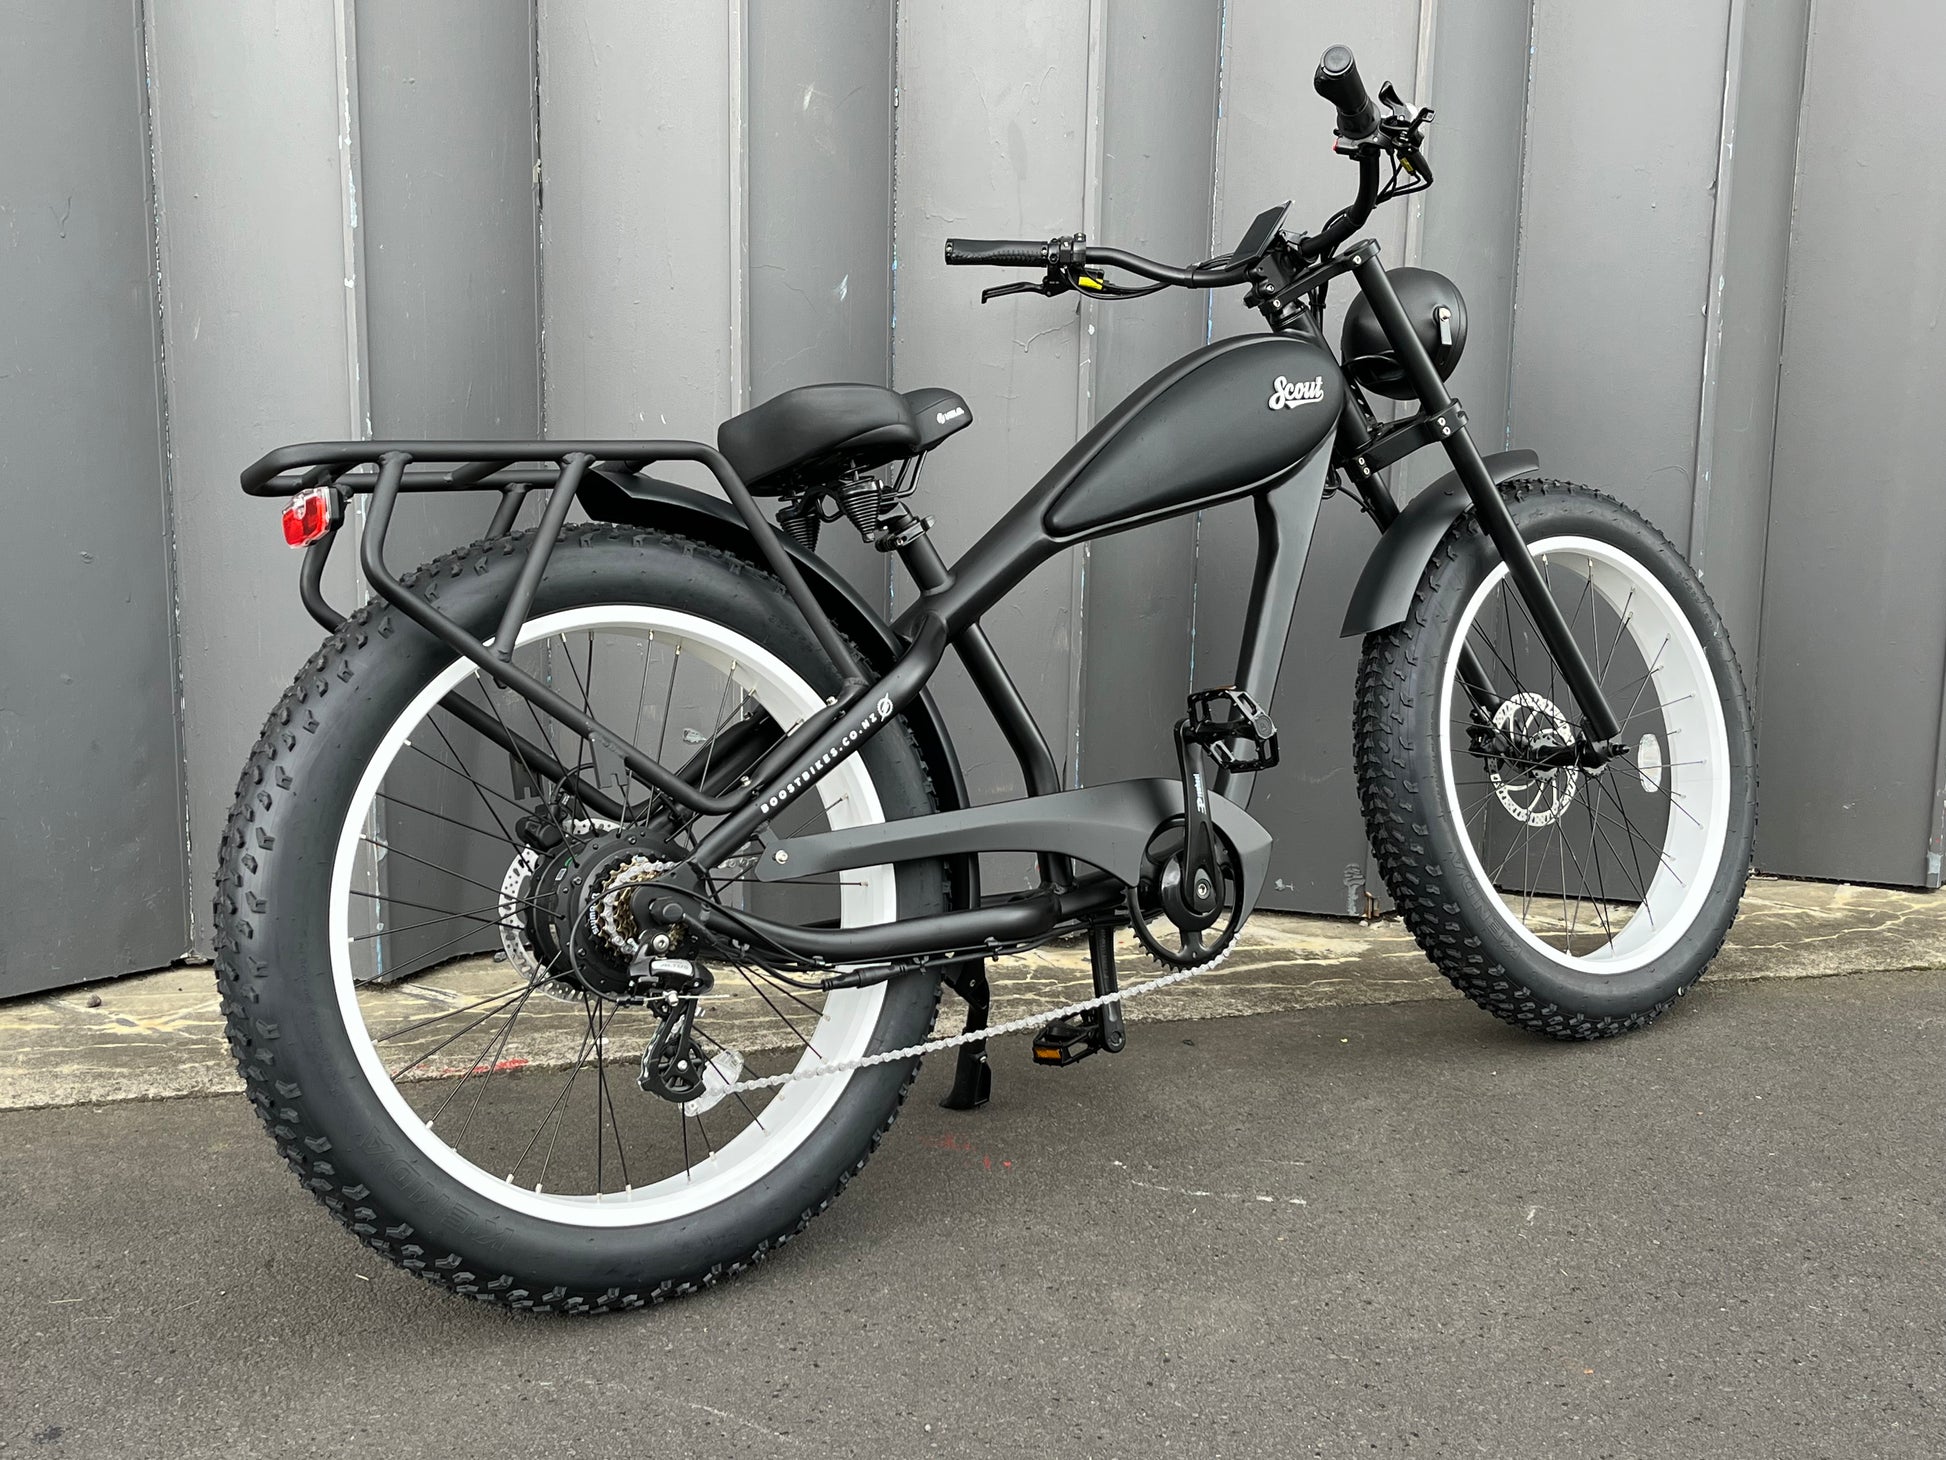 The Scout Electric Motorbike.. Awesome Retro CRUISER Style electric bikes designed for performance, having fun and looking cool.